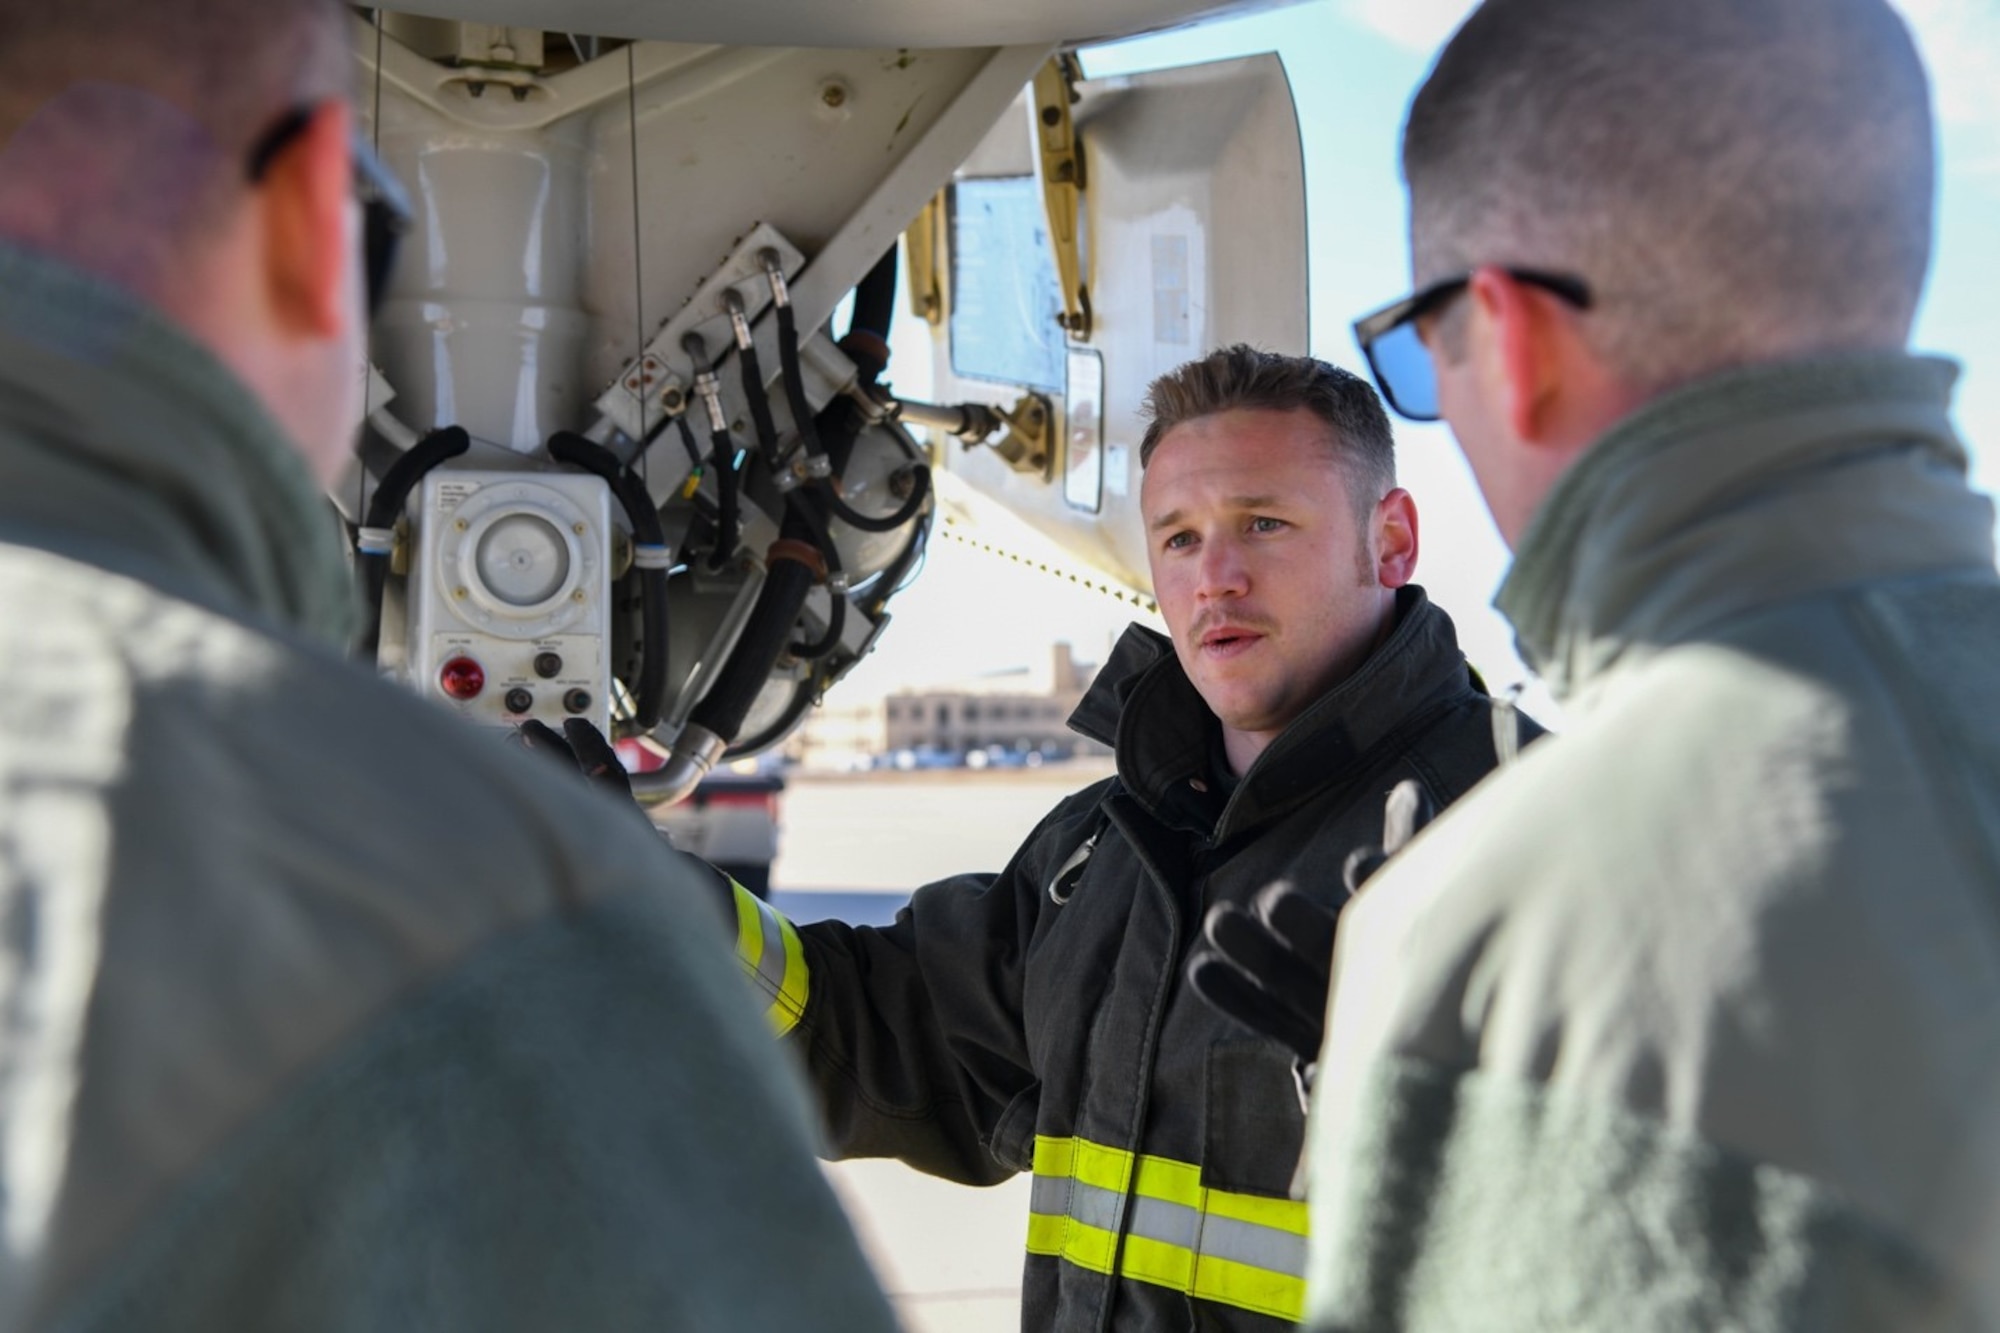 William Turner, 22nd Civil Engineering Squadron fire fighter, displays the auxiliary power unit fuel shut-off on the backside of the front landing gear Nov. 13, 2019 at McConnell Air Force, Kan. Participants in the KC-46 Firefighter Symposium had the opportunity to tour the interior and exterior of the aircraft as part of the live-demonstration training. (U.S. Air Force photo by Airman 1st Class Nilsa E. Garcia)